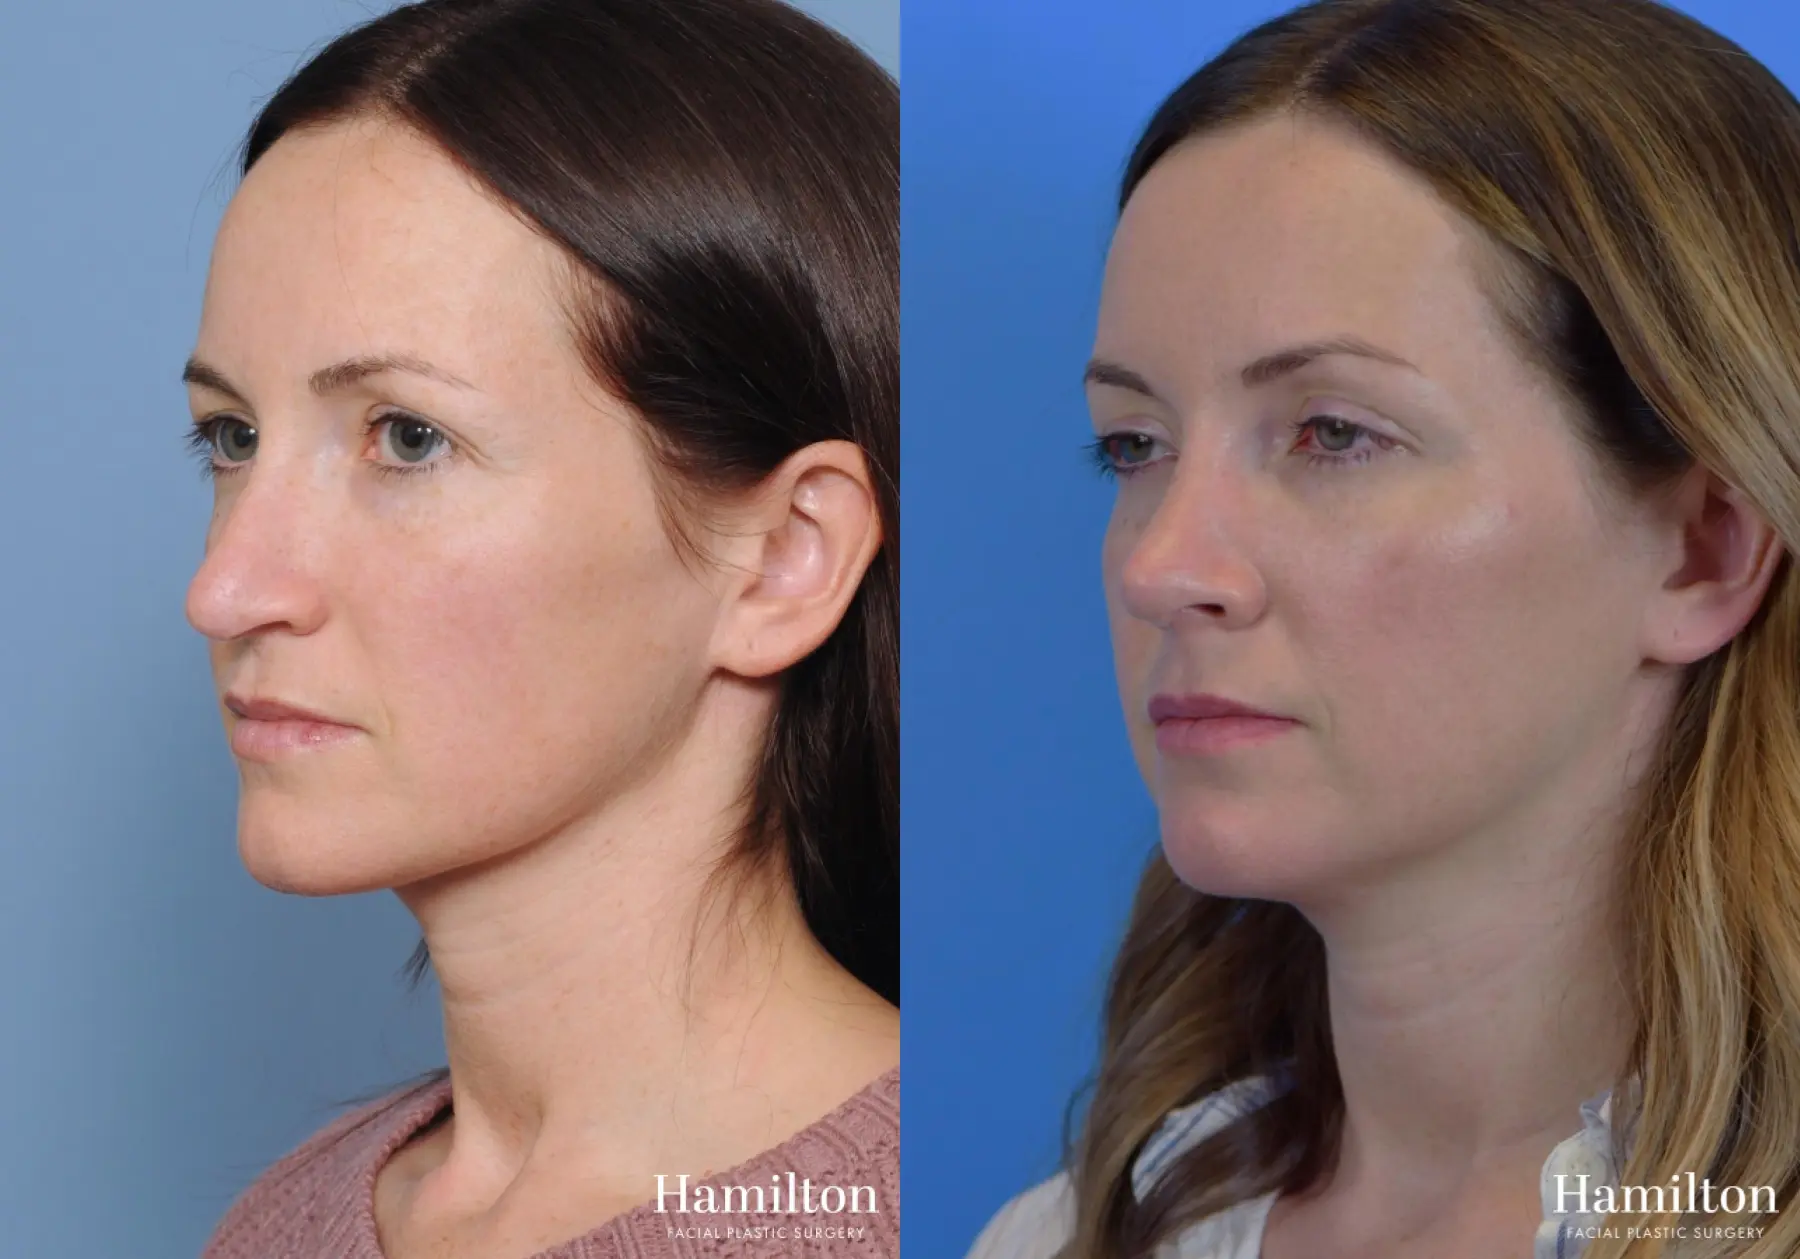 Rhinoplasty: Patient 4 - Before and After 6